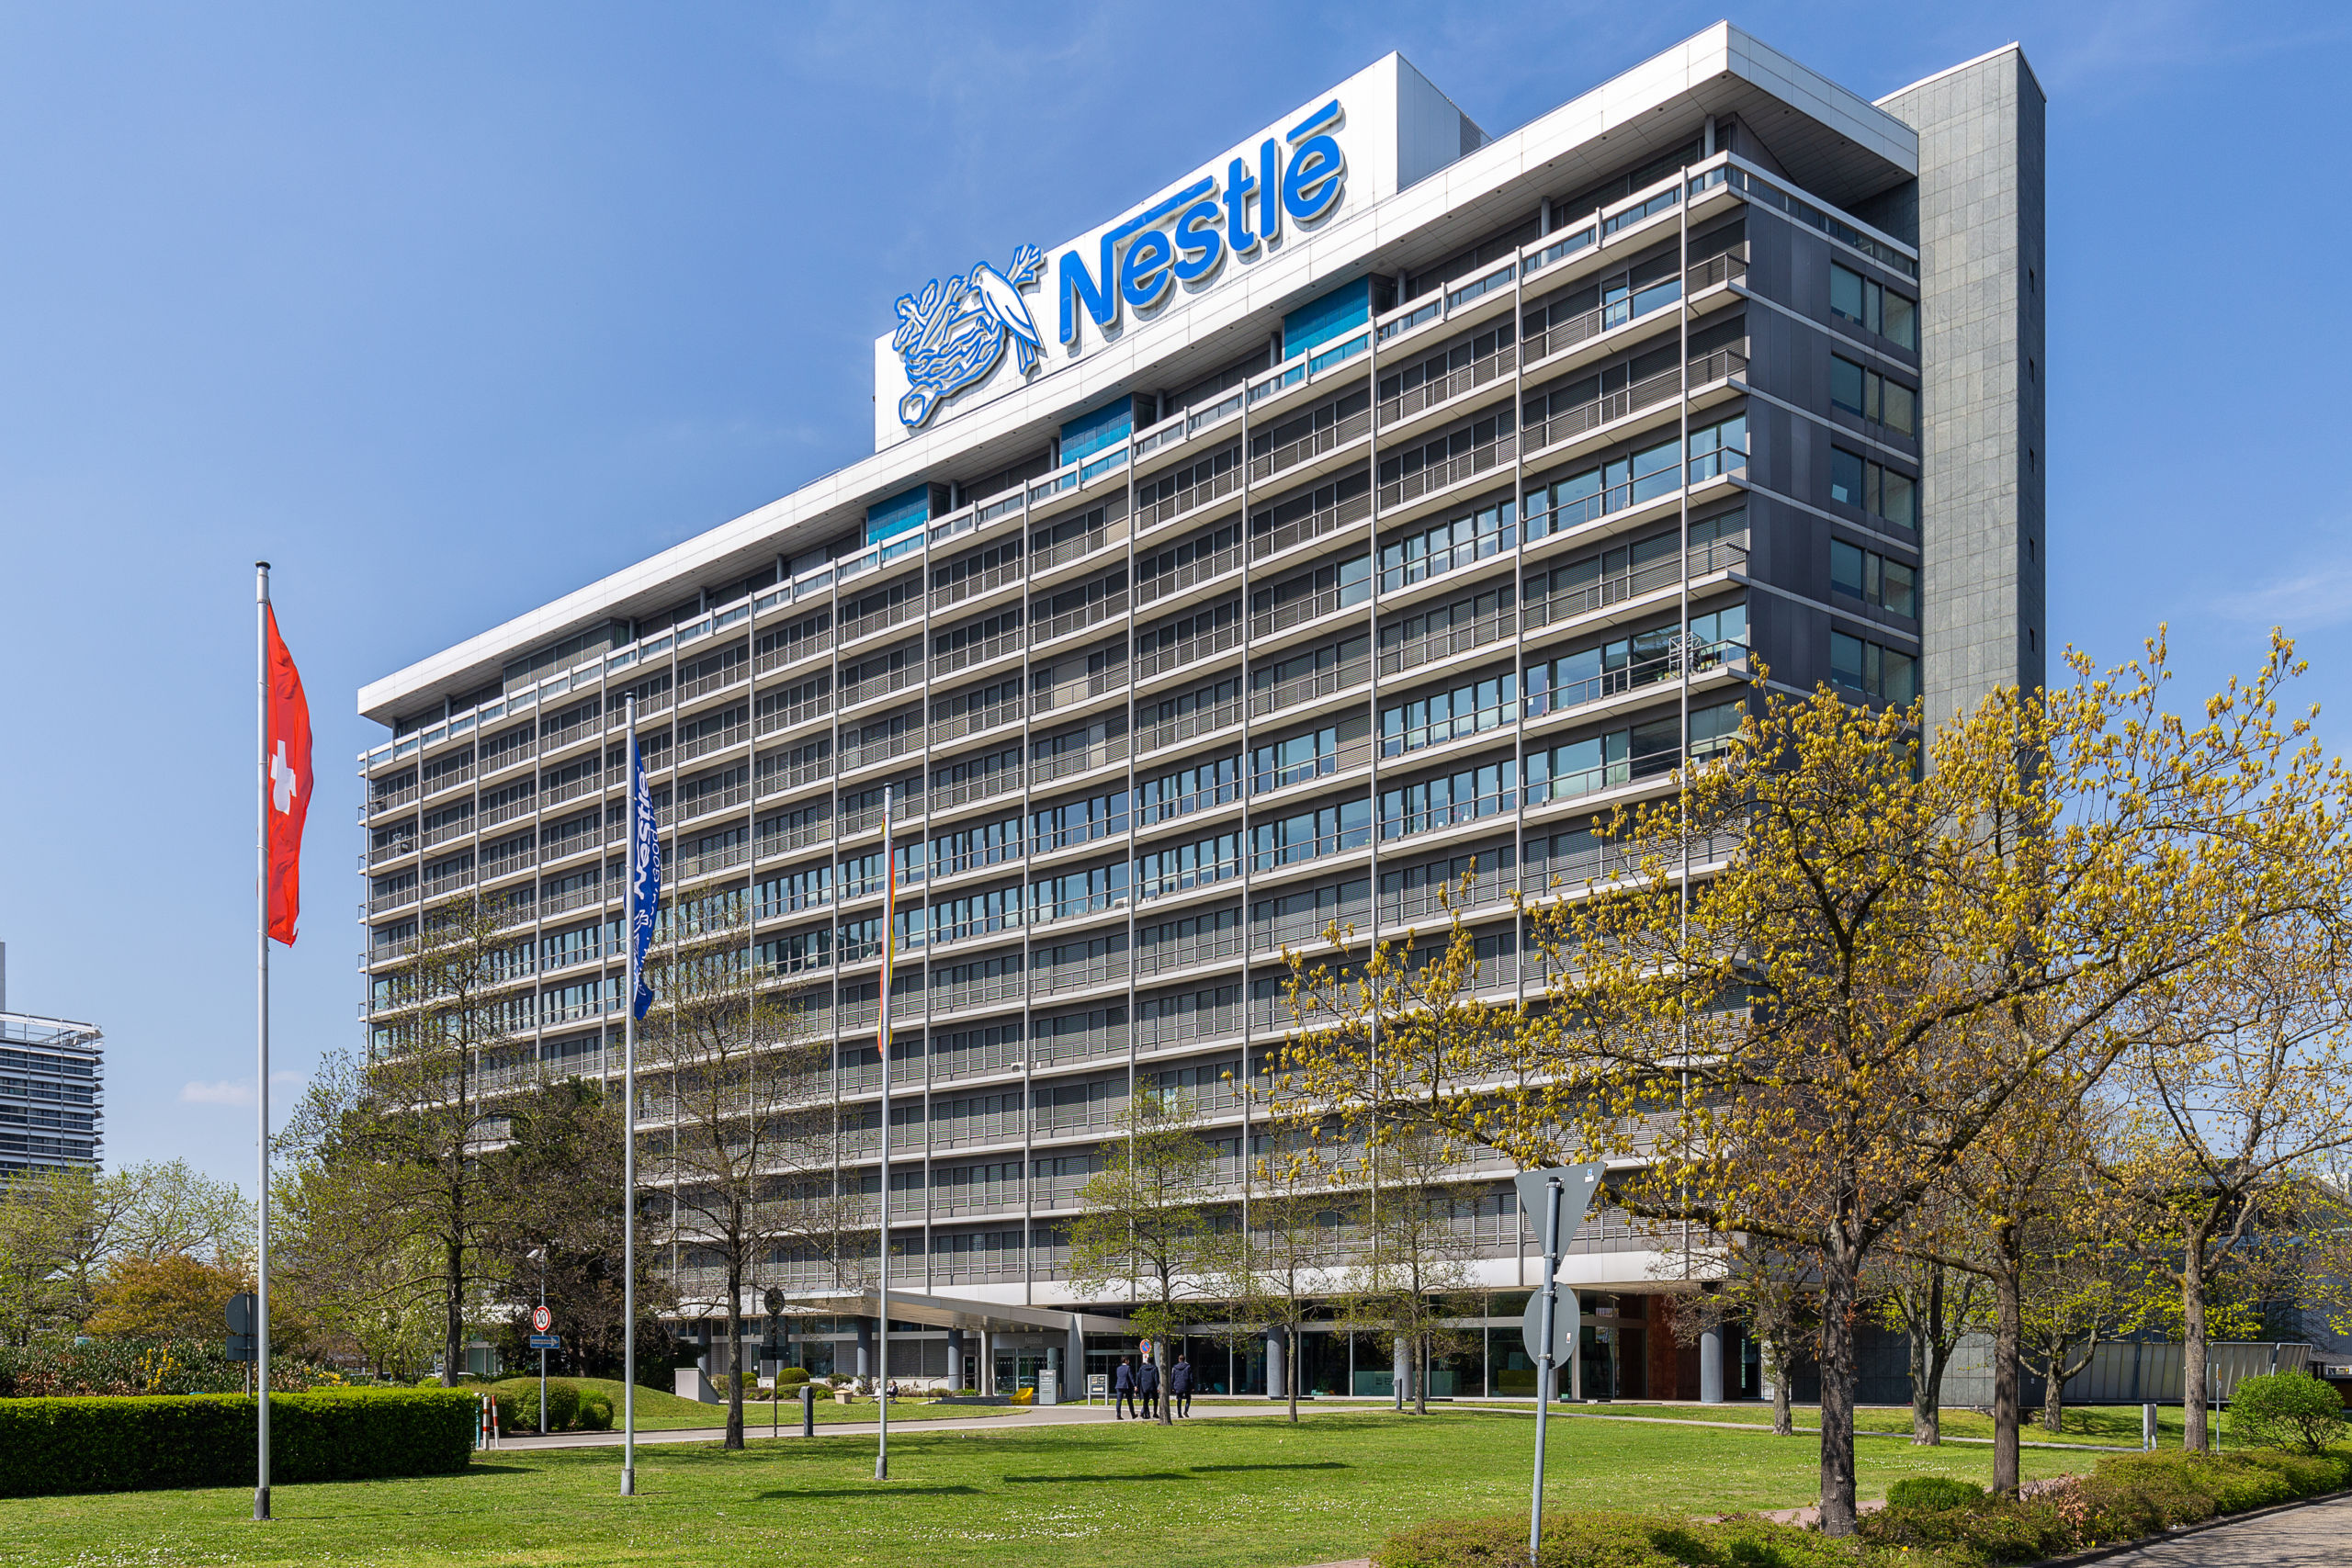 Nestlé invests $100M USD to build its first plant-based facility in China